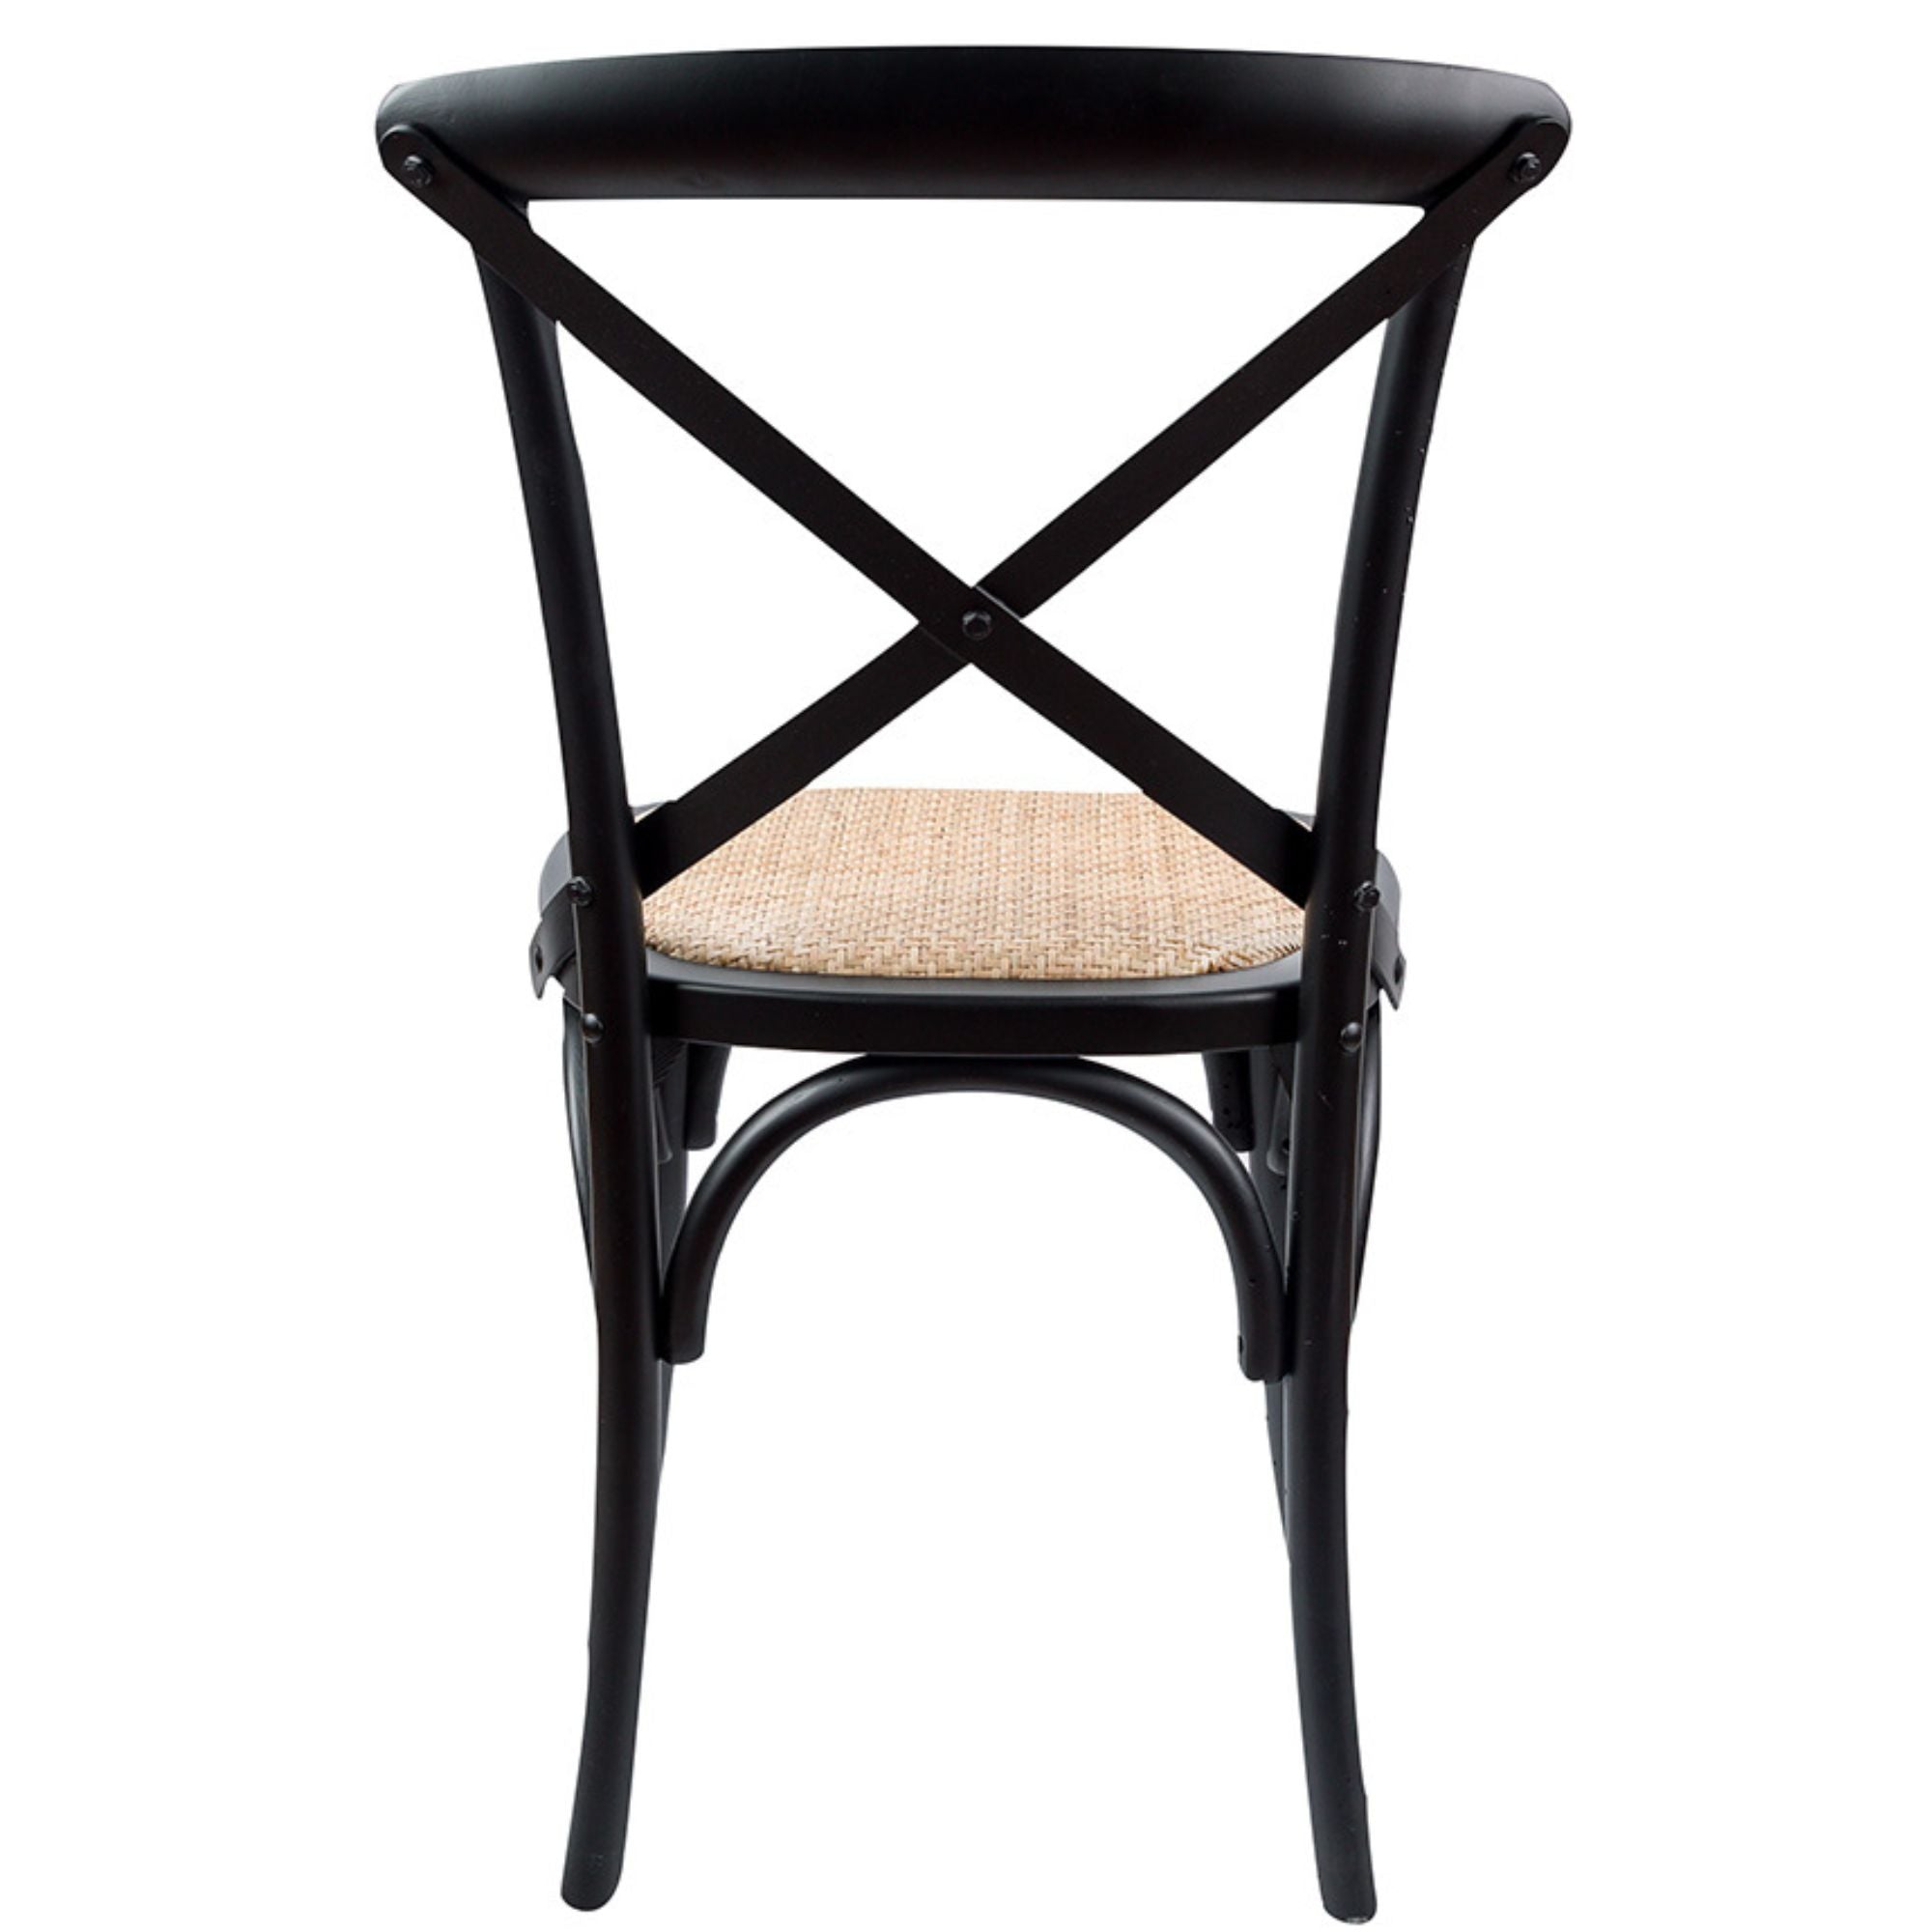 Aster Crossback Dining Chair Set of 4 Solid Birch Timber Wood Ratan Seat - Black